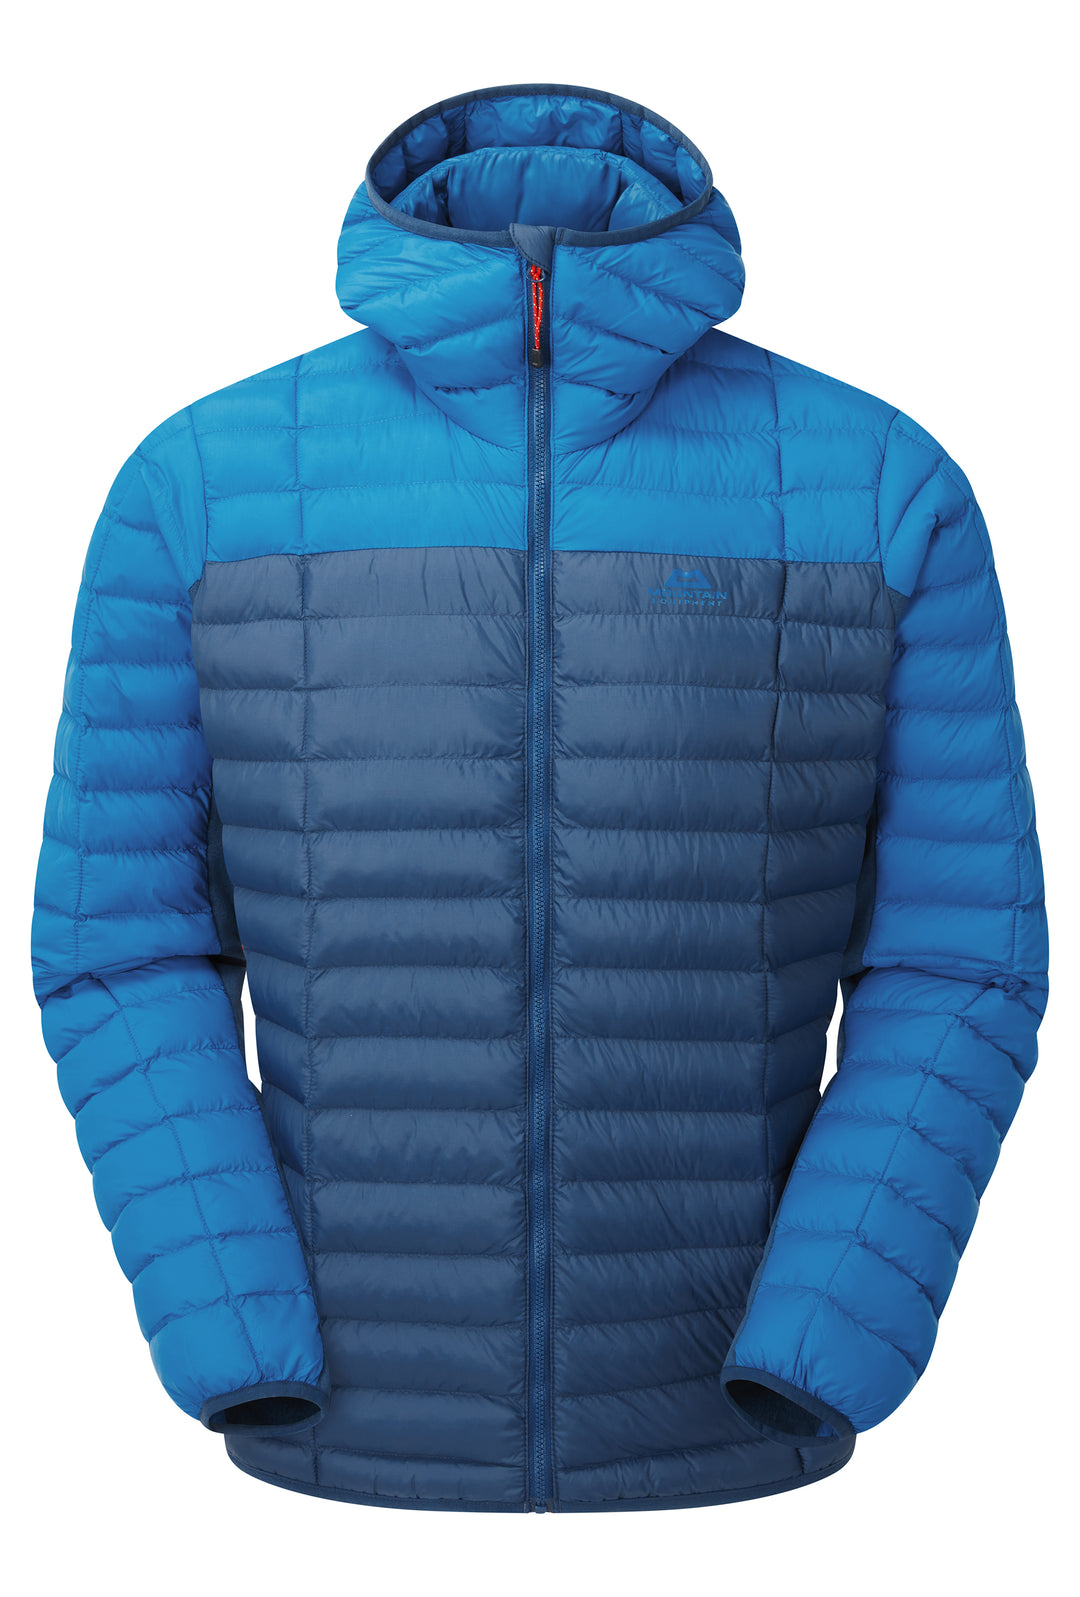 Mountain Equipment Mens Particle Hooded Jacket.